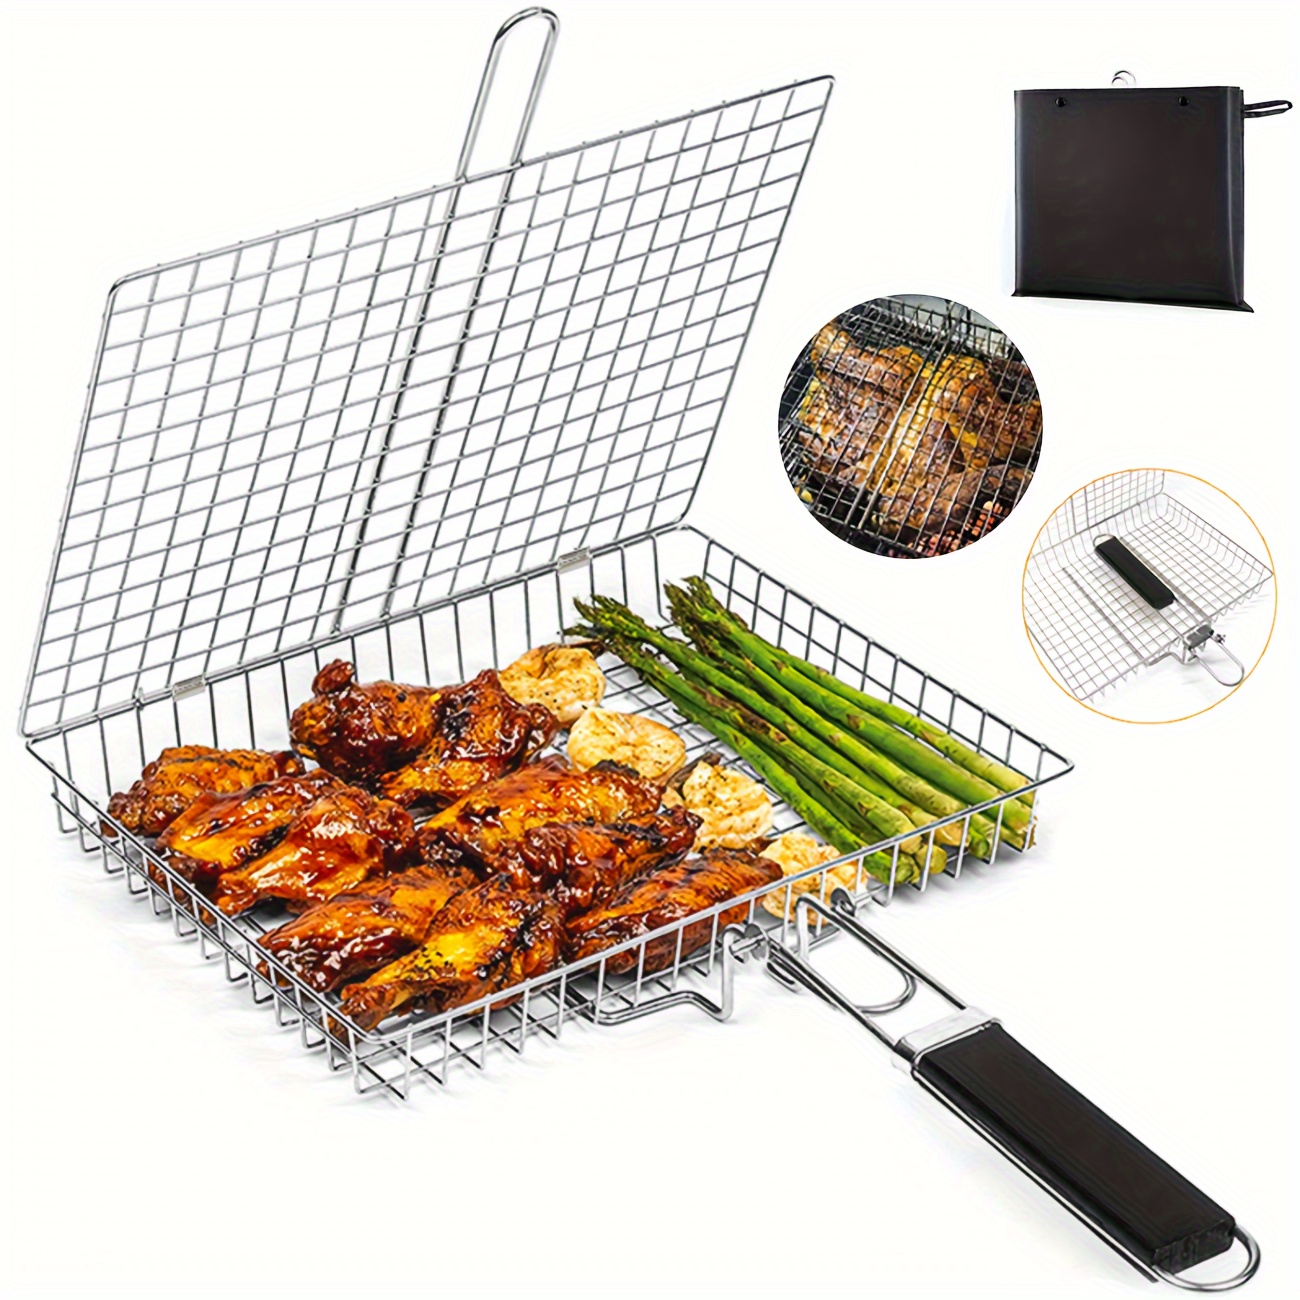 Stainless Steel Barbecue Cooking Mesh Shelf